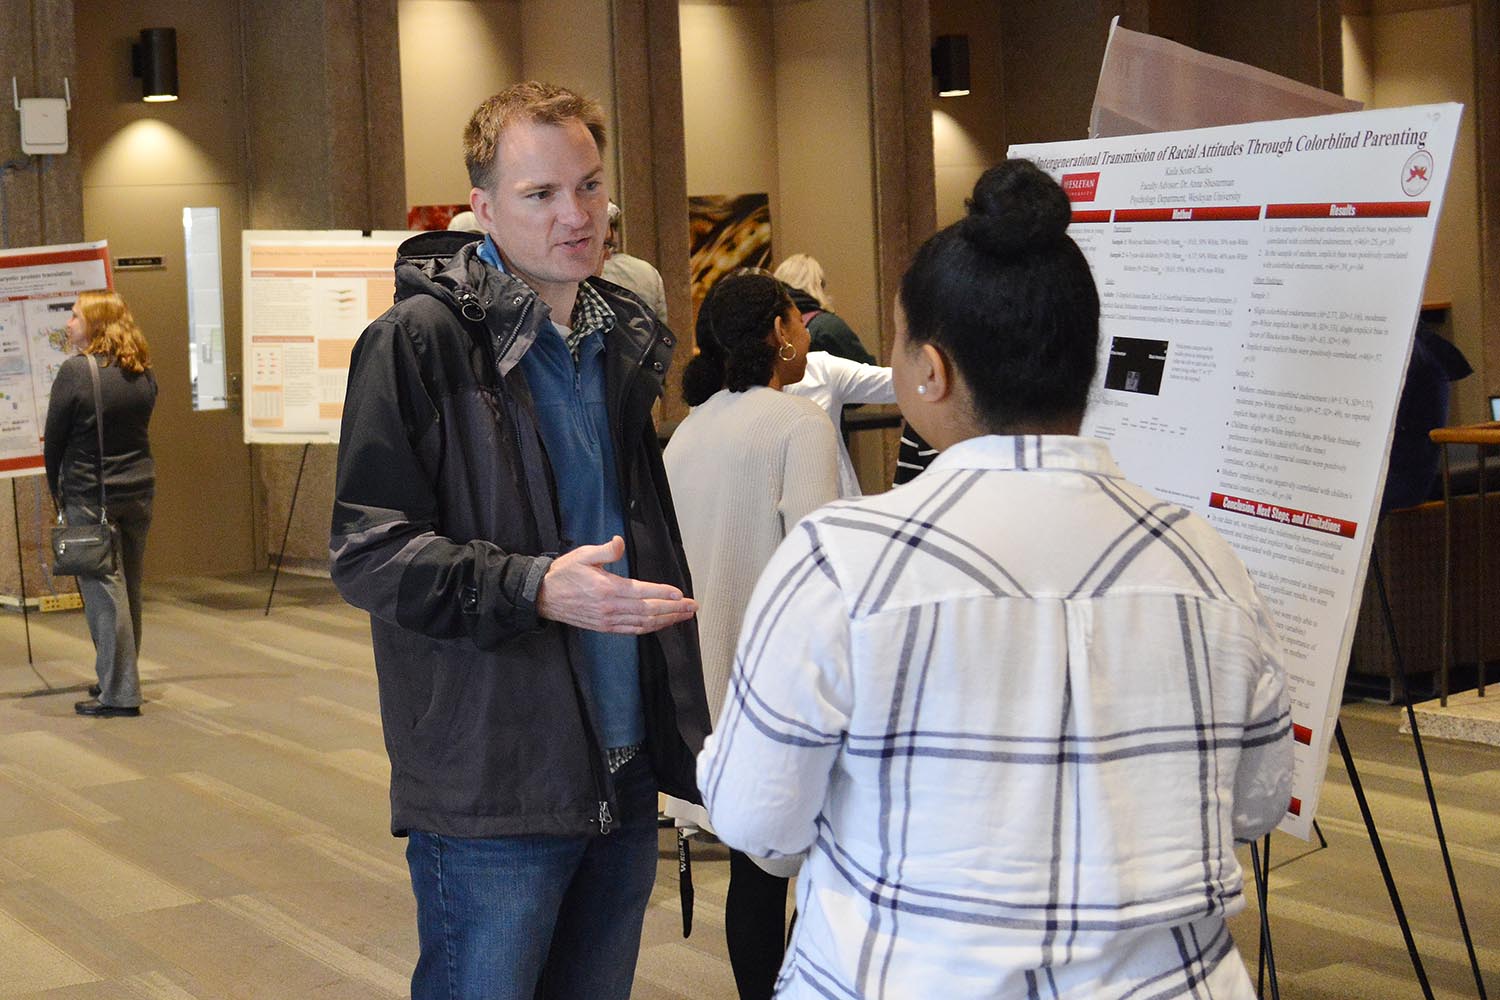 Seth Redfield, chair and associate professor of astronomy, speaks to Kaila Scott '19 about her study titled "The Intergenerational Transmission of Racial Attitudes: The Effects of Colorblind Parenting." Scott's advisor is Anna Shusterman, associate professor of psychology.